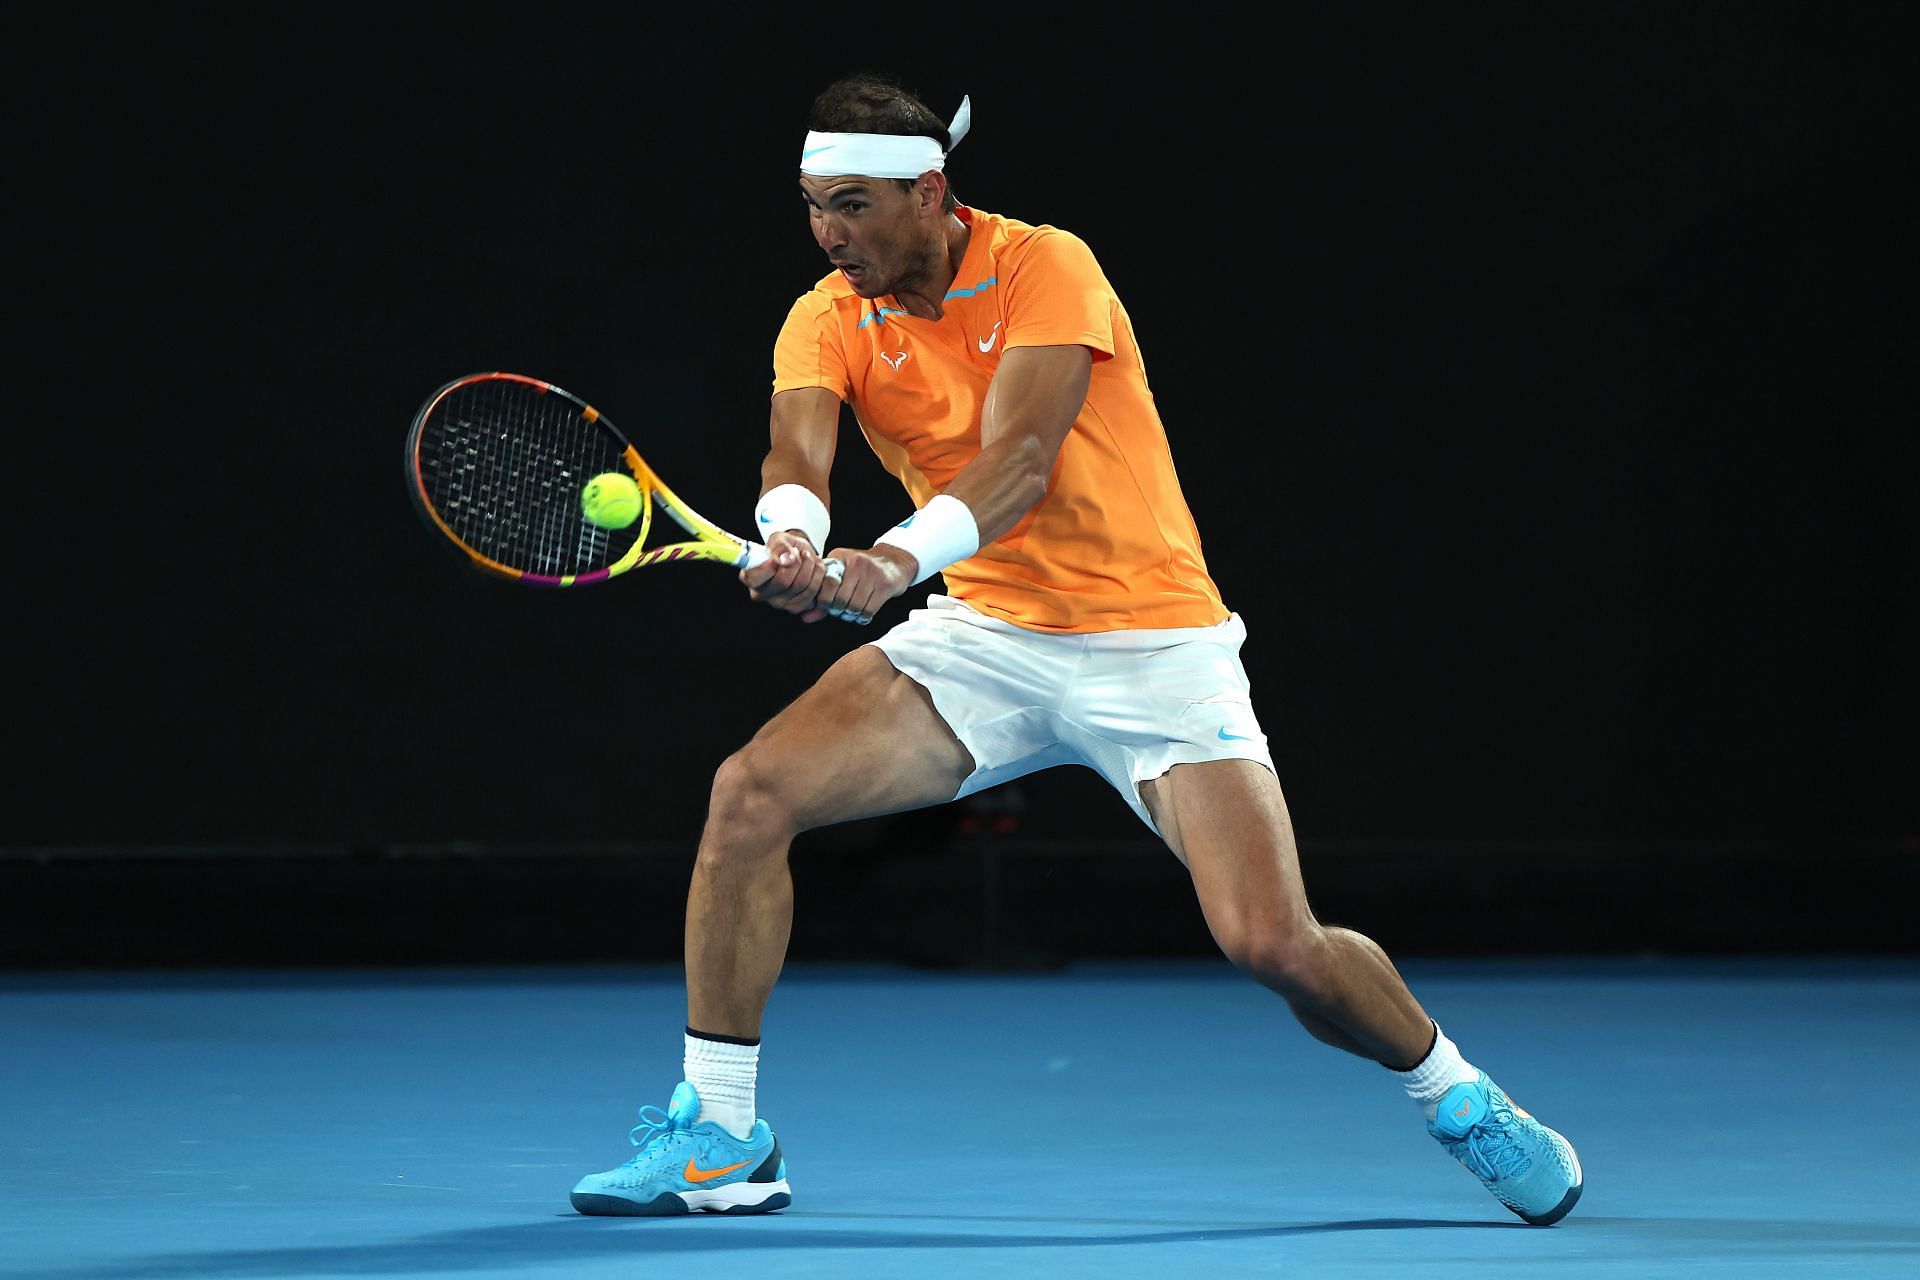 Rafael Nadal in action at the Australian Open 2023